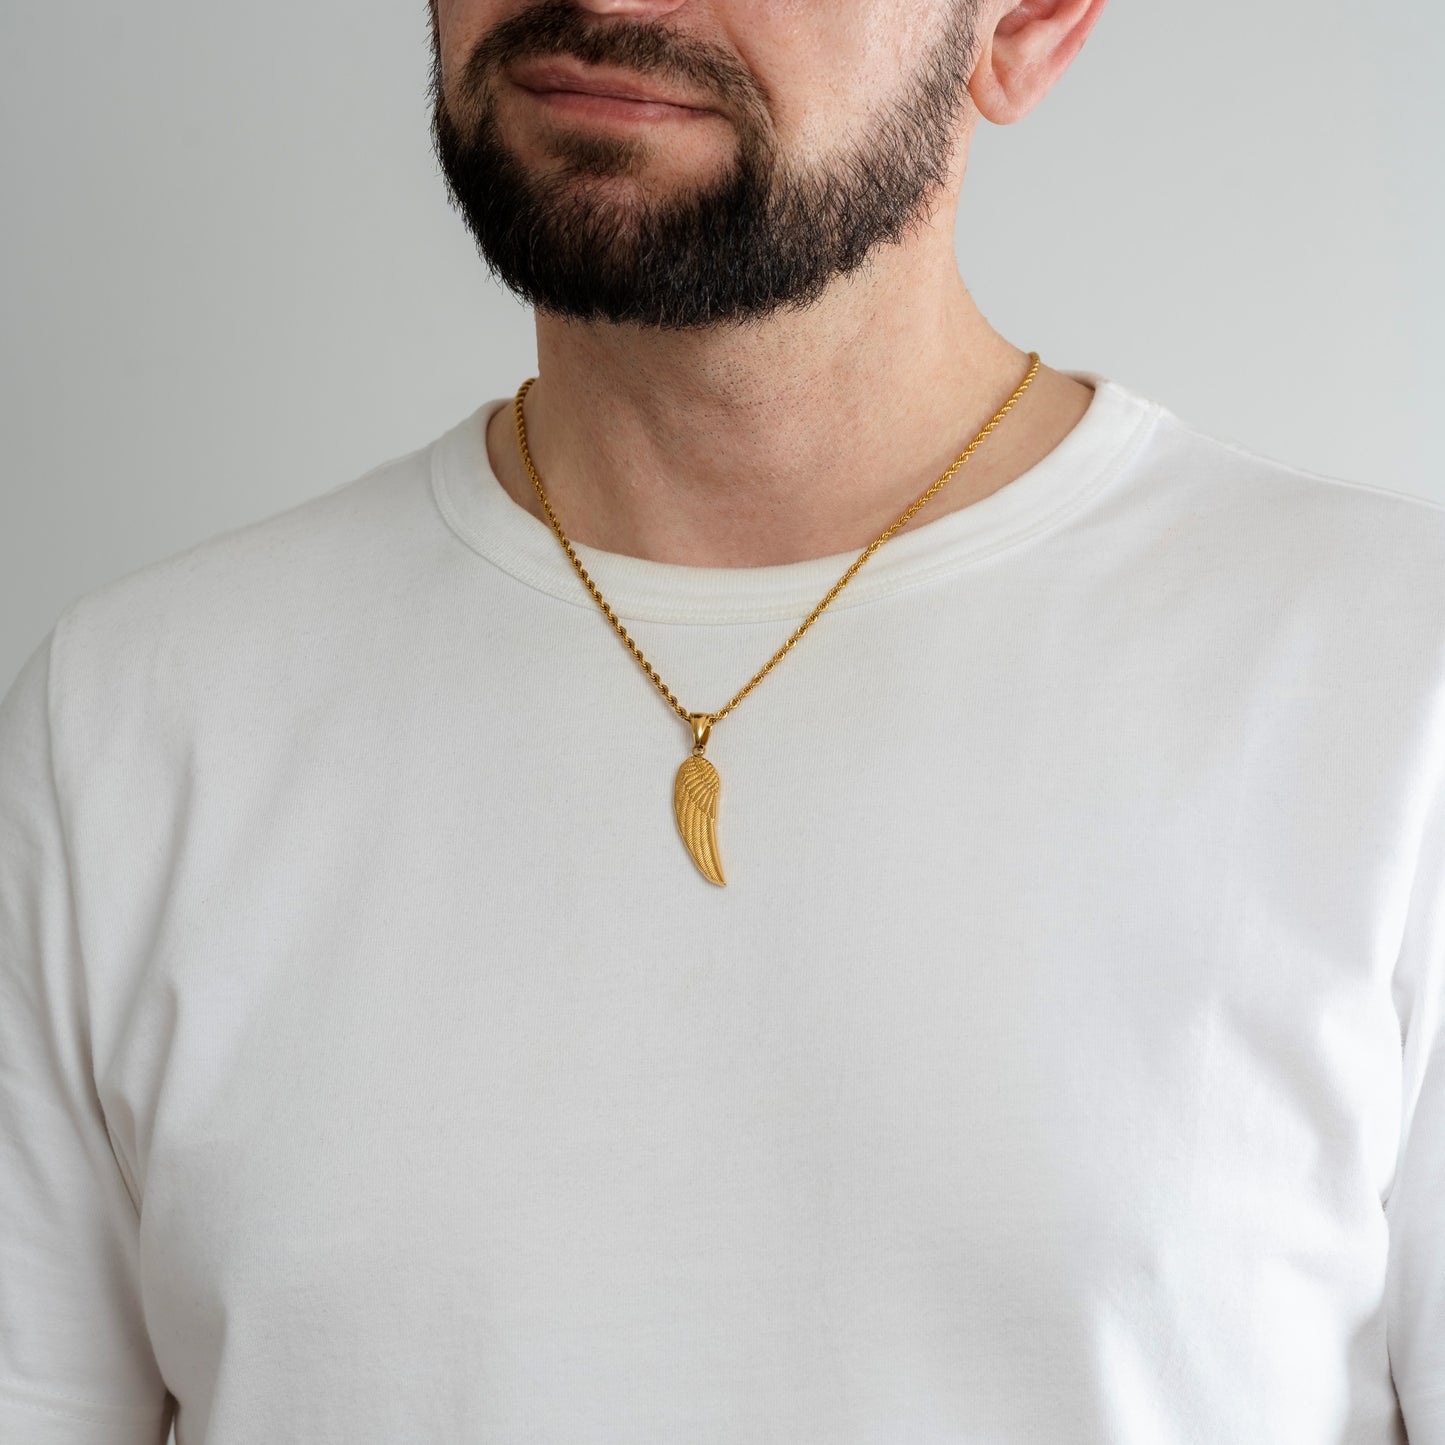 A male model in a white t-shirt wearing an Angel Wing Gold Pendant with a 3mm Gold Rope chain 22 inches.